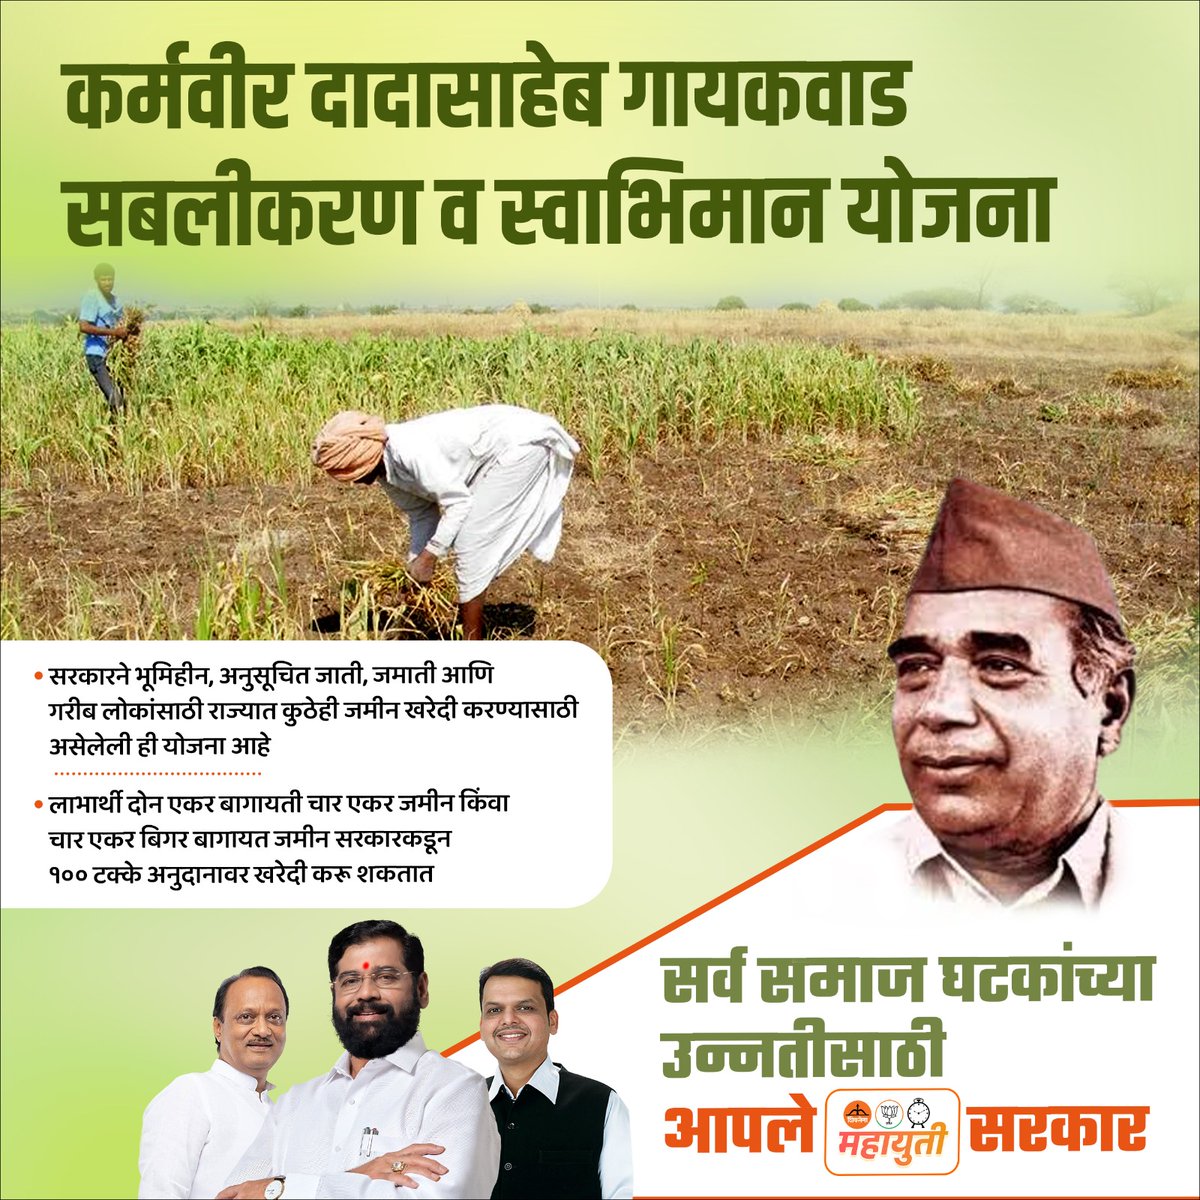 Hats off to CM Eknath Shinde for the groundbreaking Karmaveer Dadasaheb Gaikwad Sablikaran and Swabhiman Yojana. Offering land at 100% subsidy to the landless SC, ST, and poor is a step towards a just society.